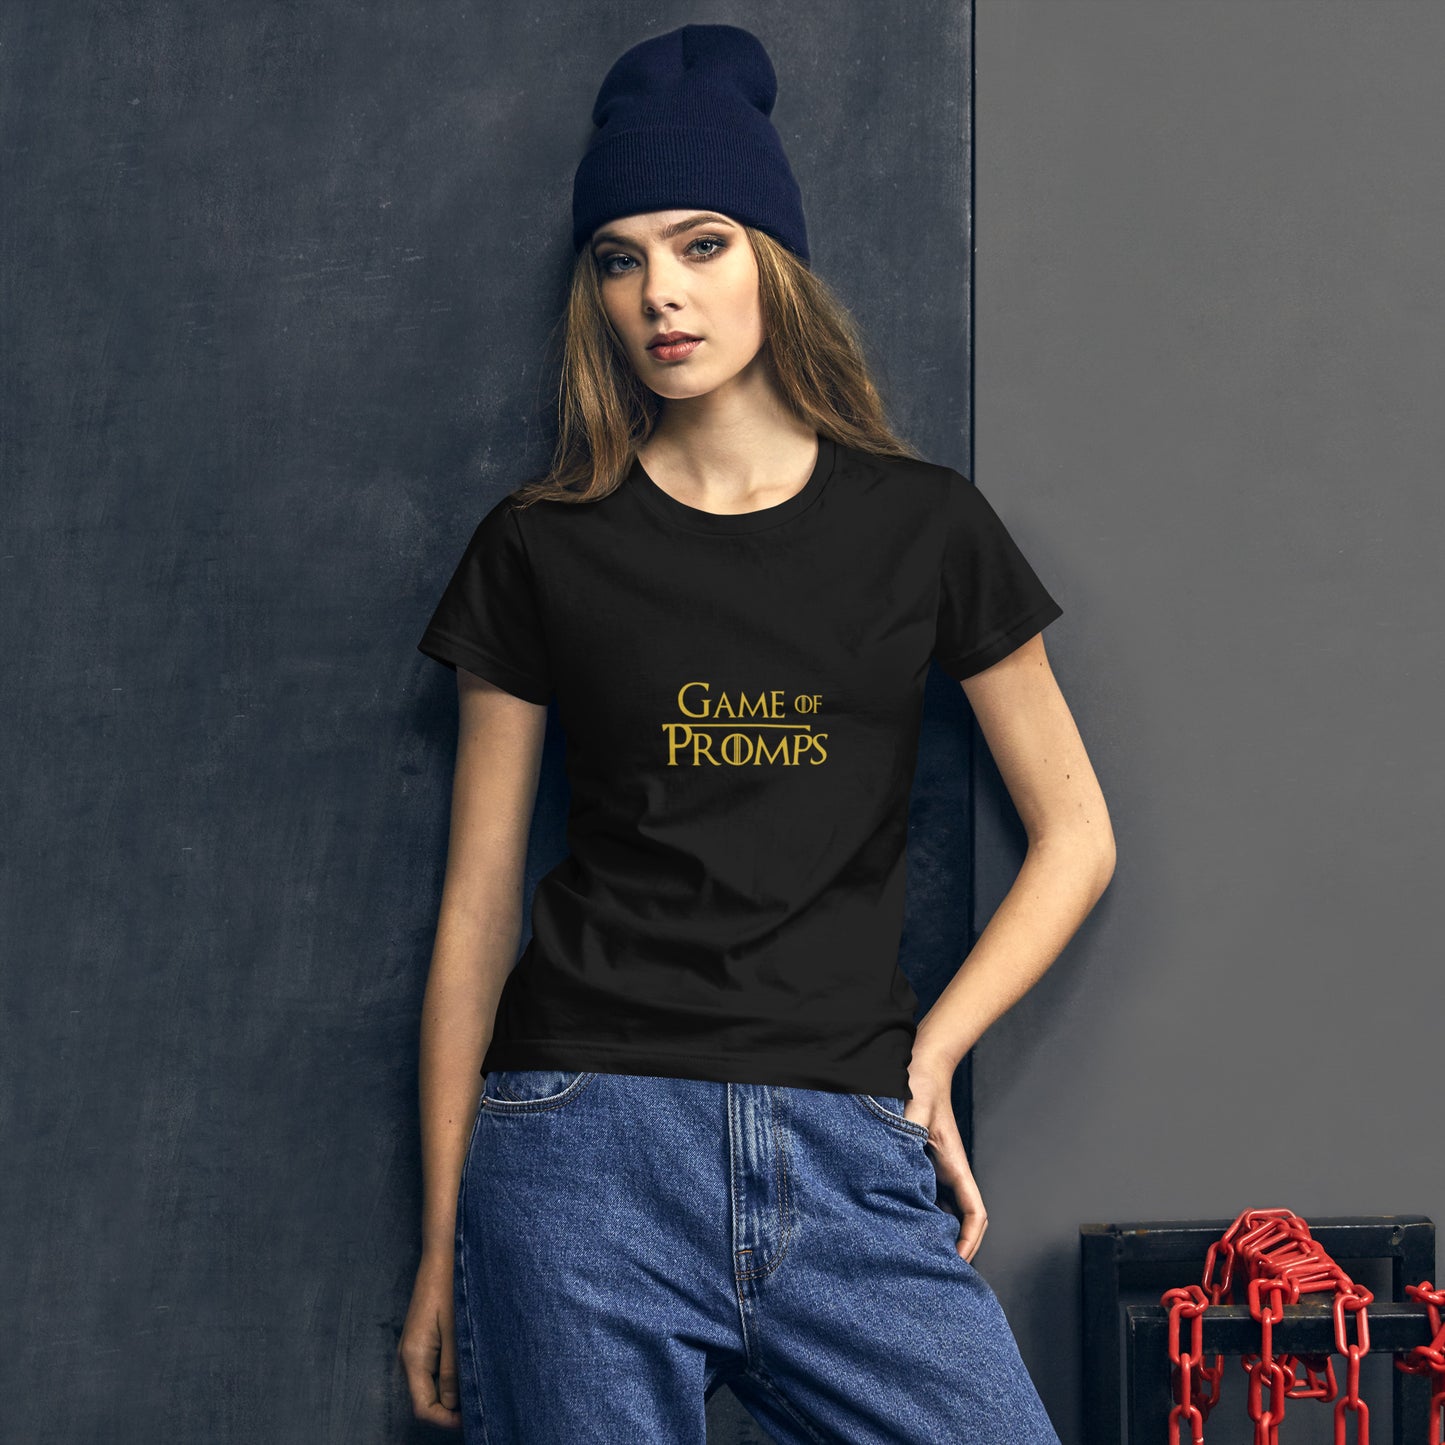 T-shirt for women "Game of Prompts"